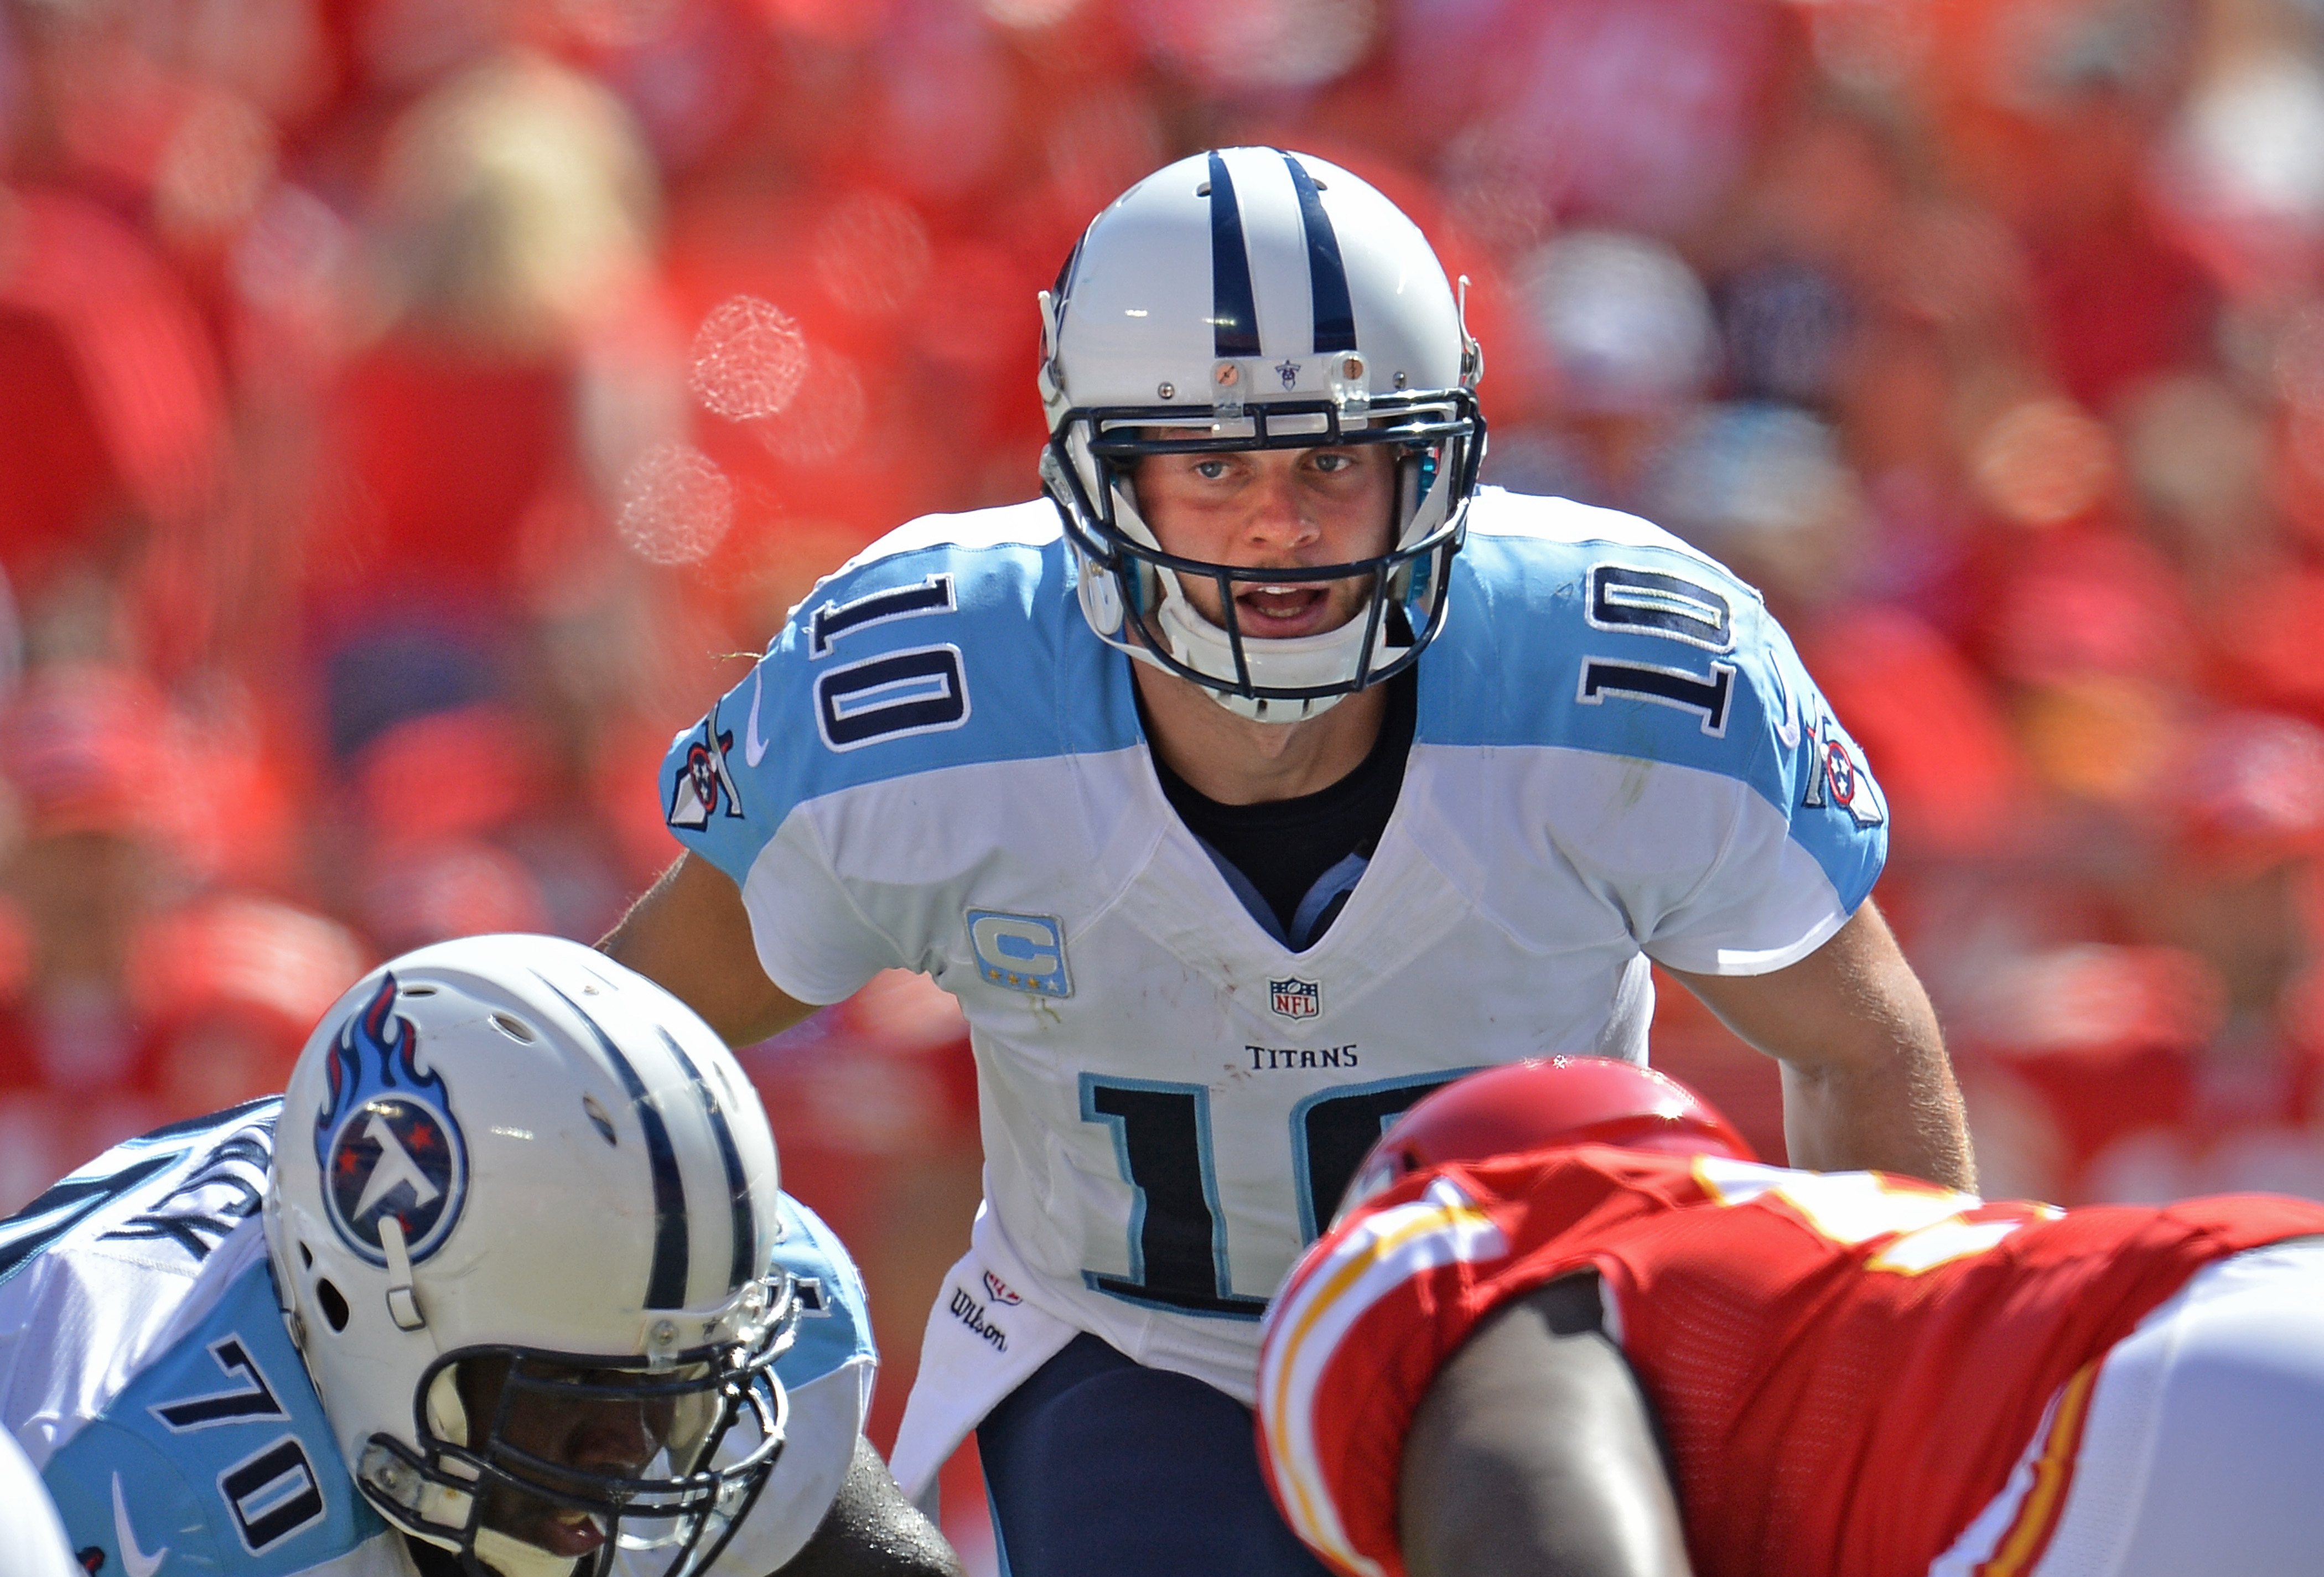 Why Jake Locker Really Declined $5-$10 Million to Return to the NFL: ‘To Continue Would Be Unfair’